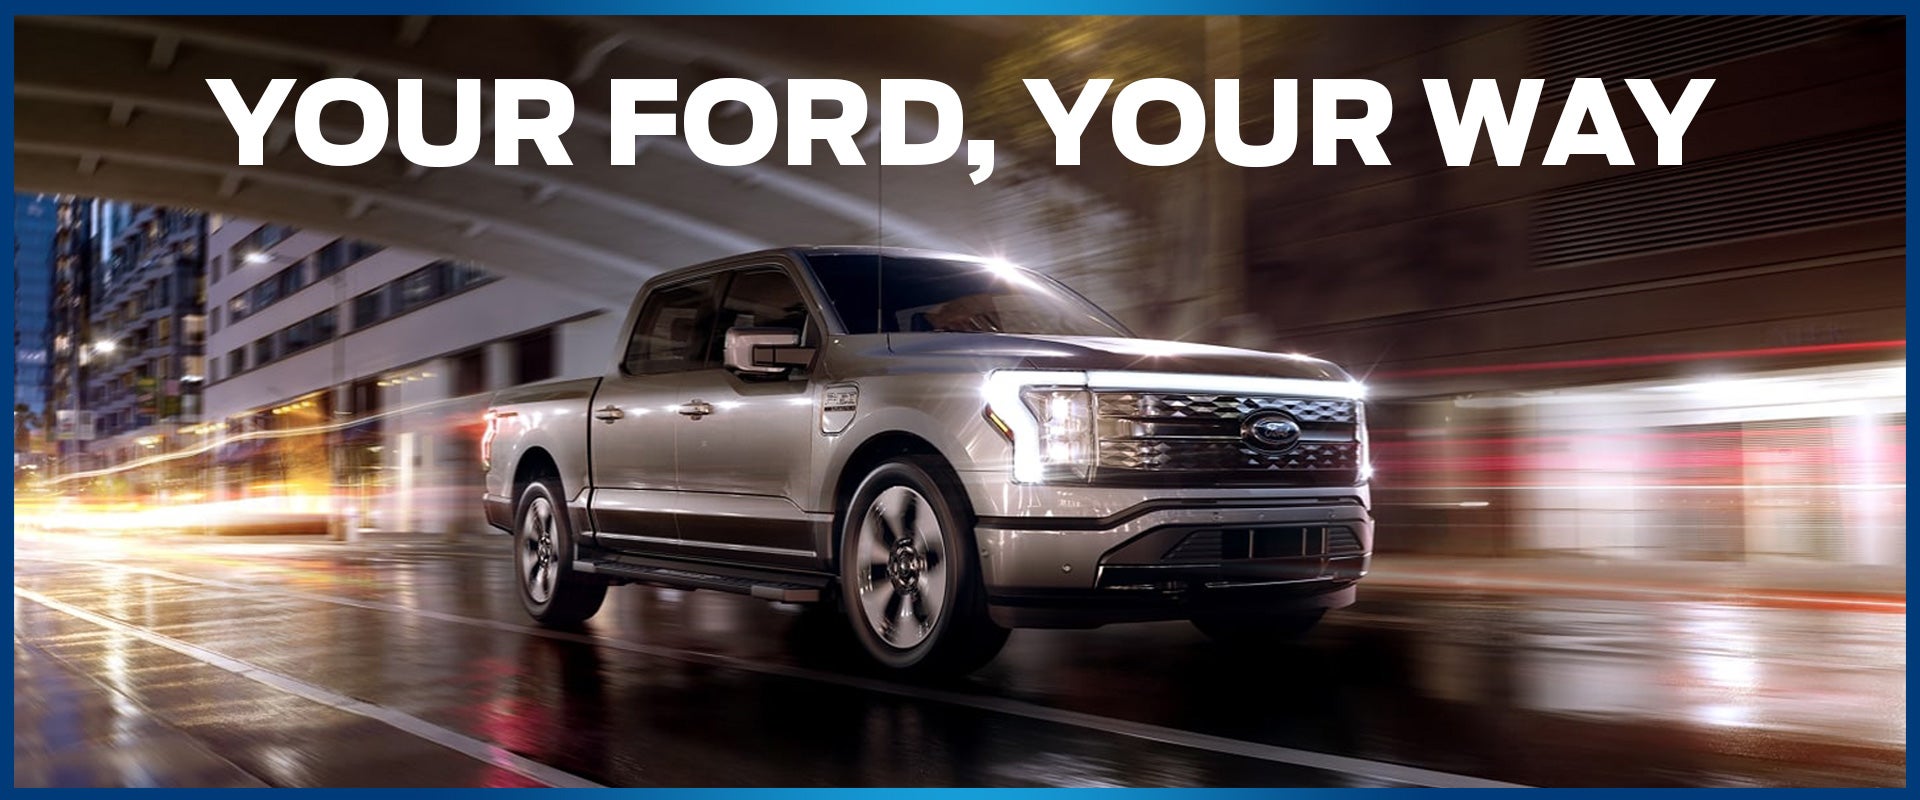 Ford Custom Order Process | Build Your Own Ford Today